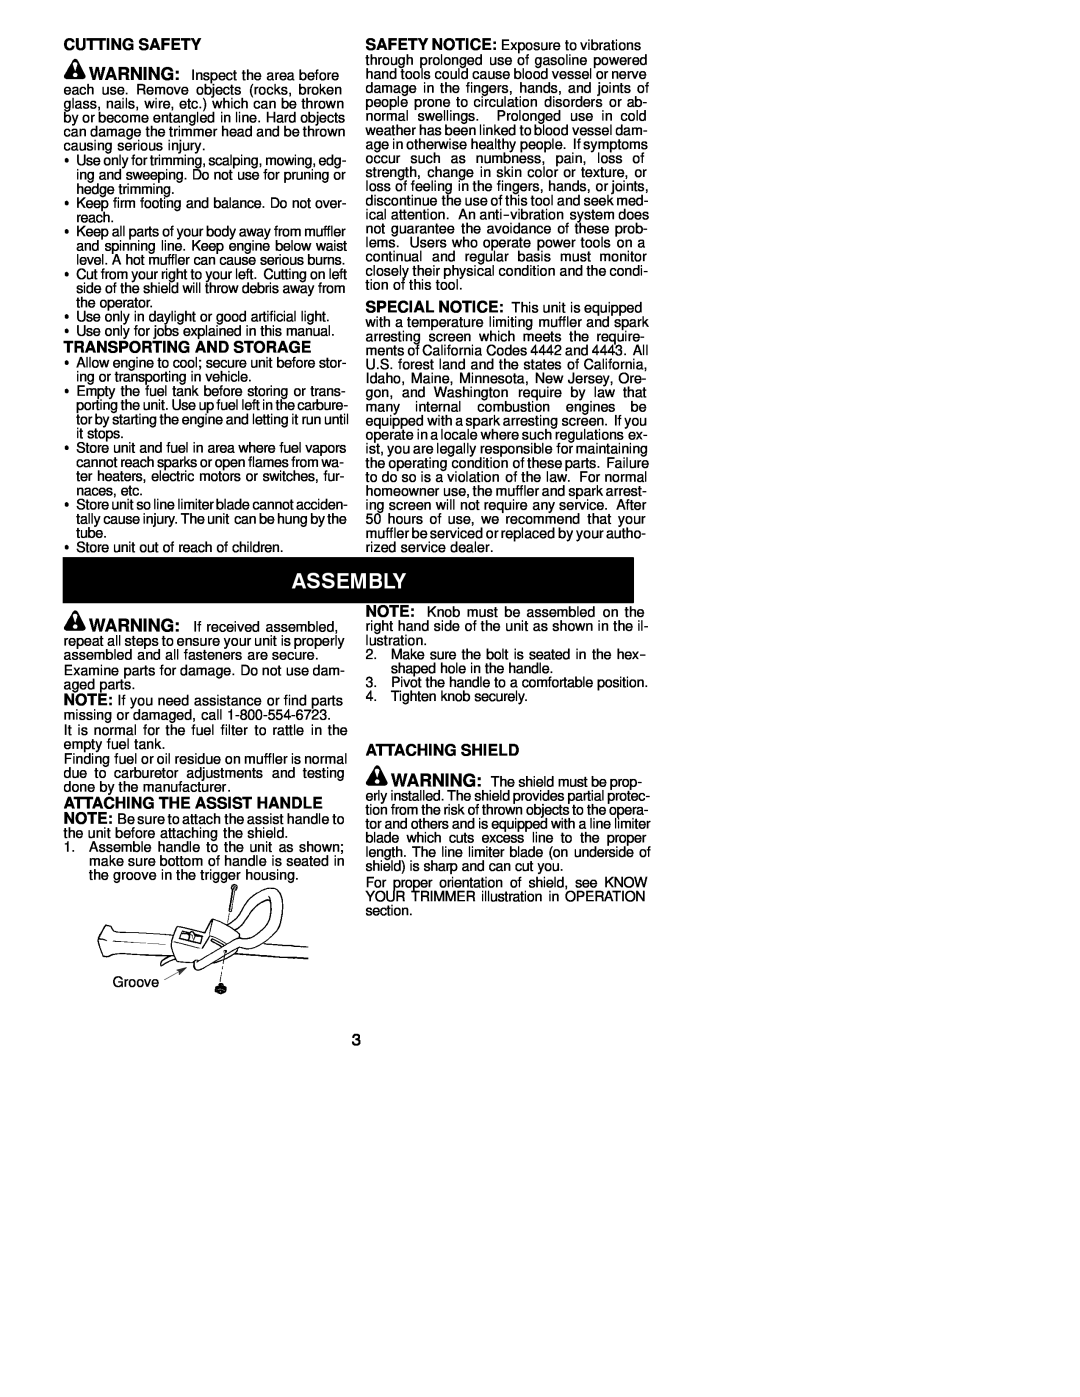 Weed Eater 530086935 instruction manual Cutting Safety, Transporting And Storage, Attaching Shield 